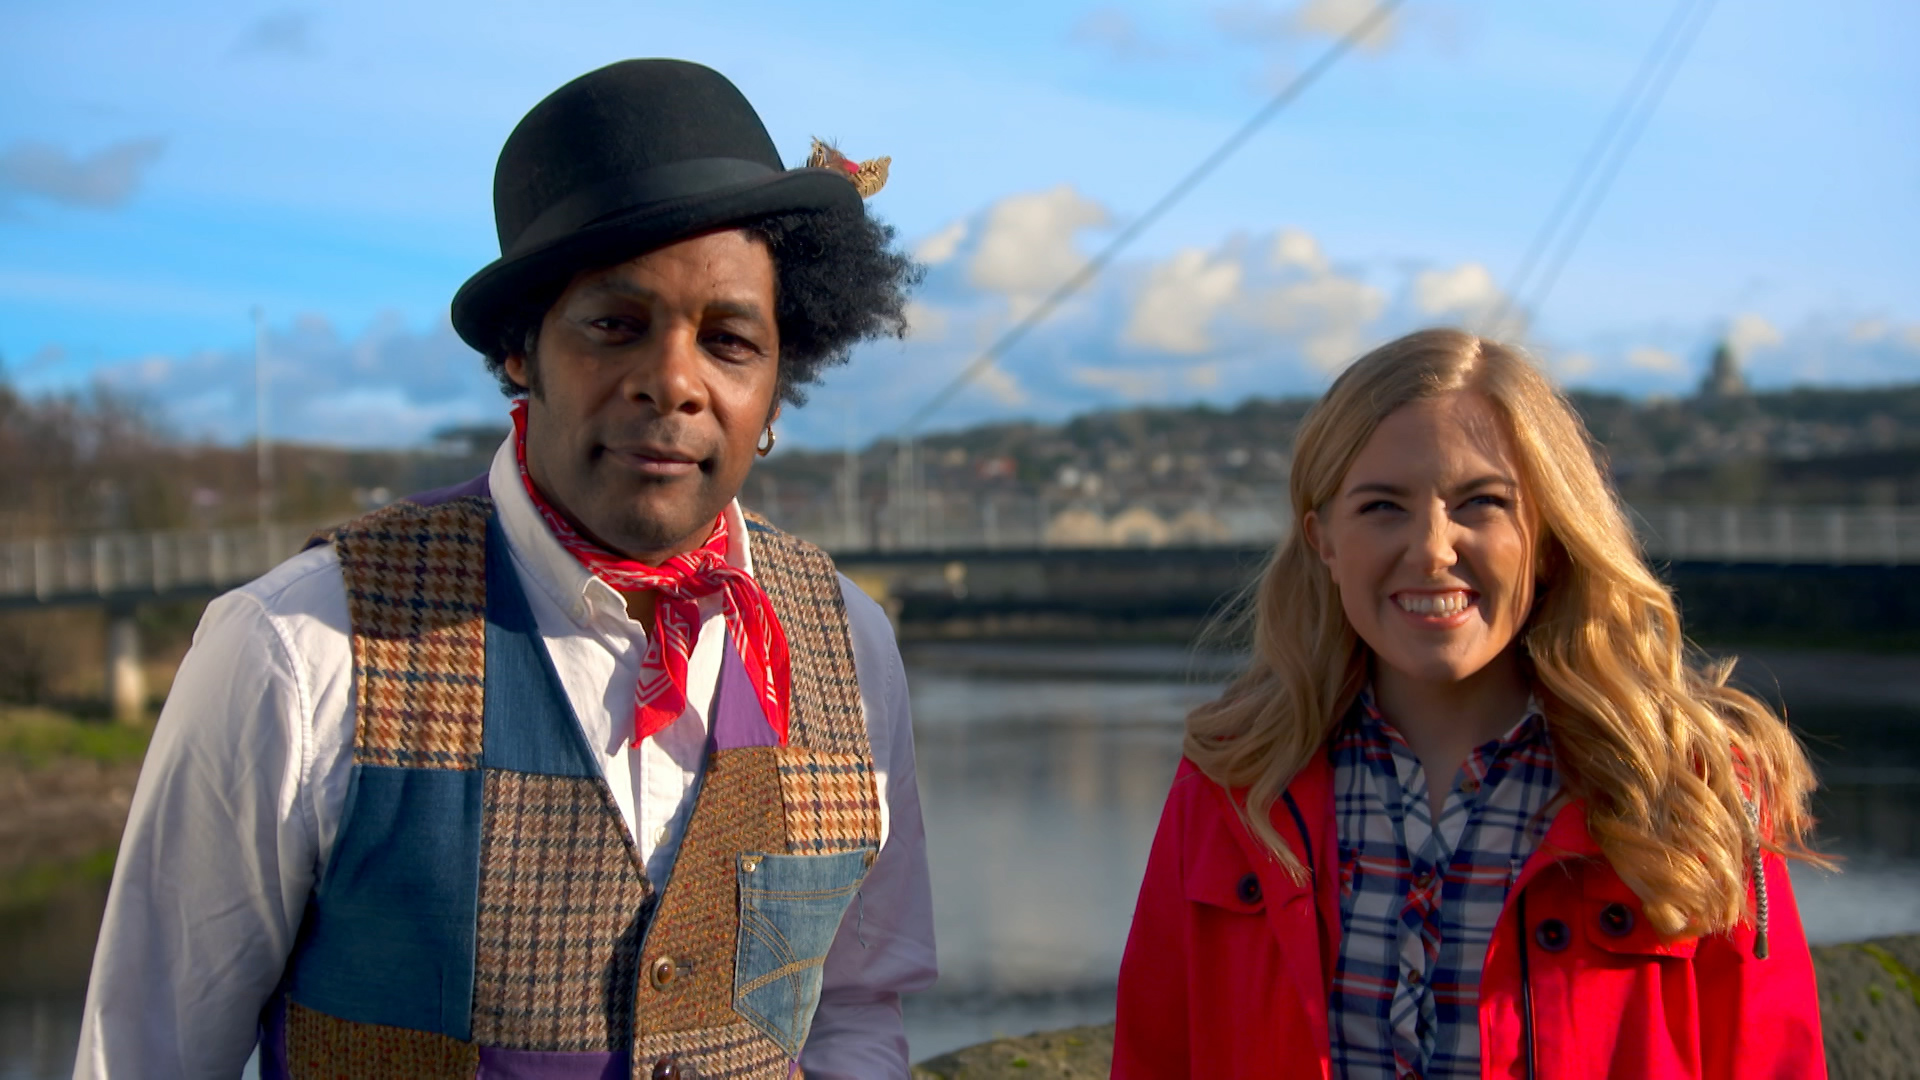 Cbeebies Puss In Boots - Danny and Maddie in Lancaster